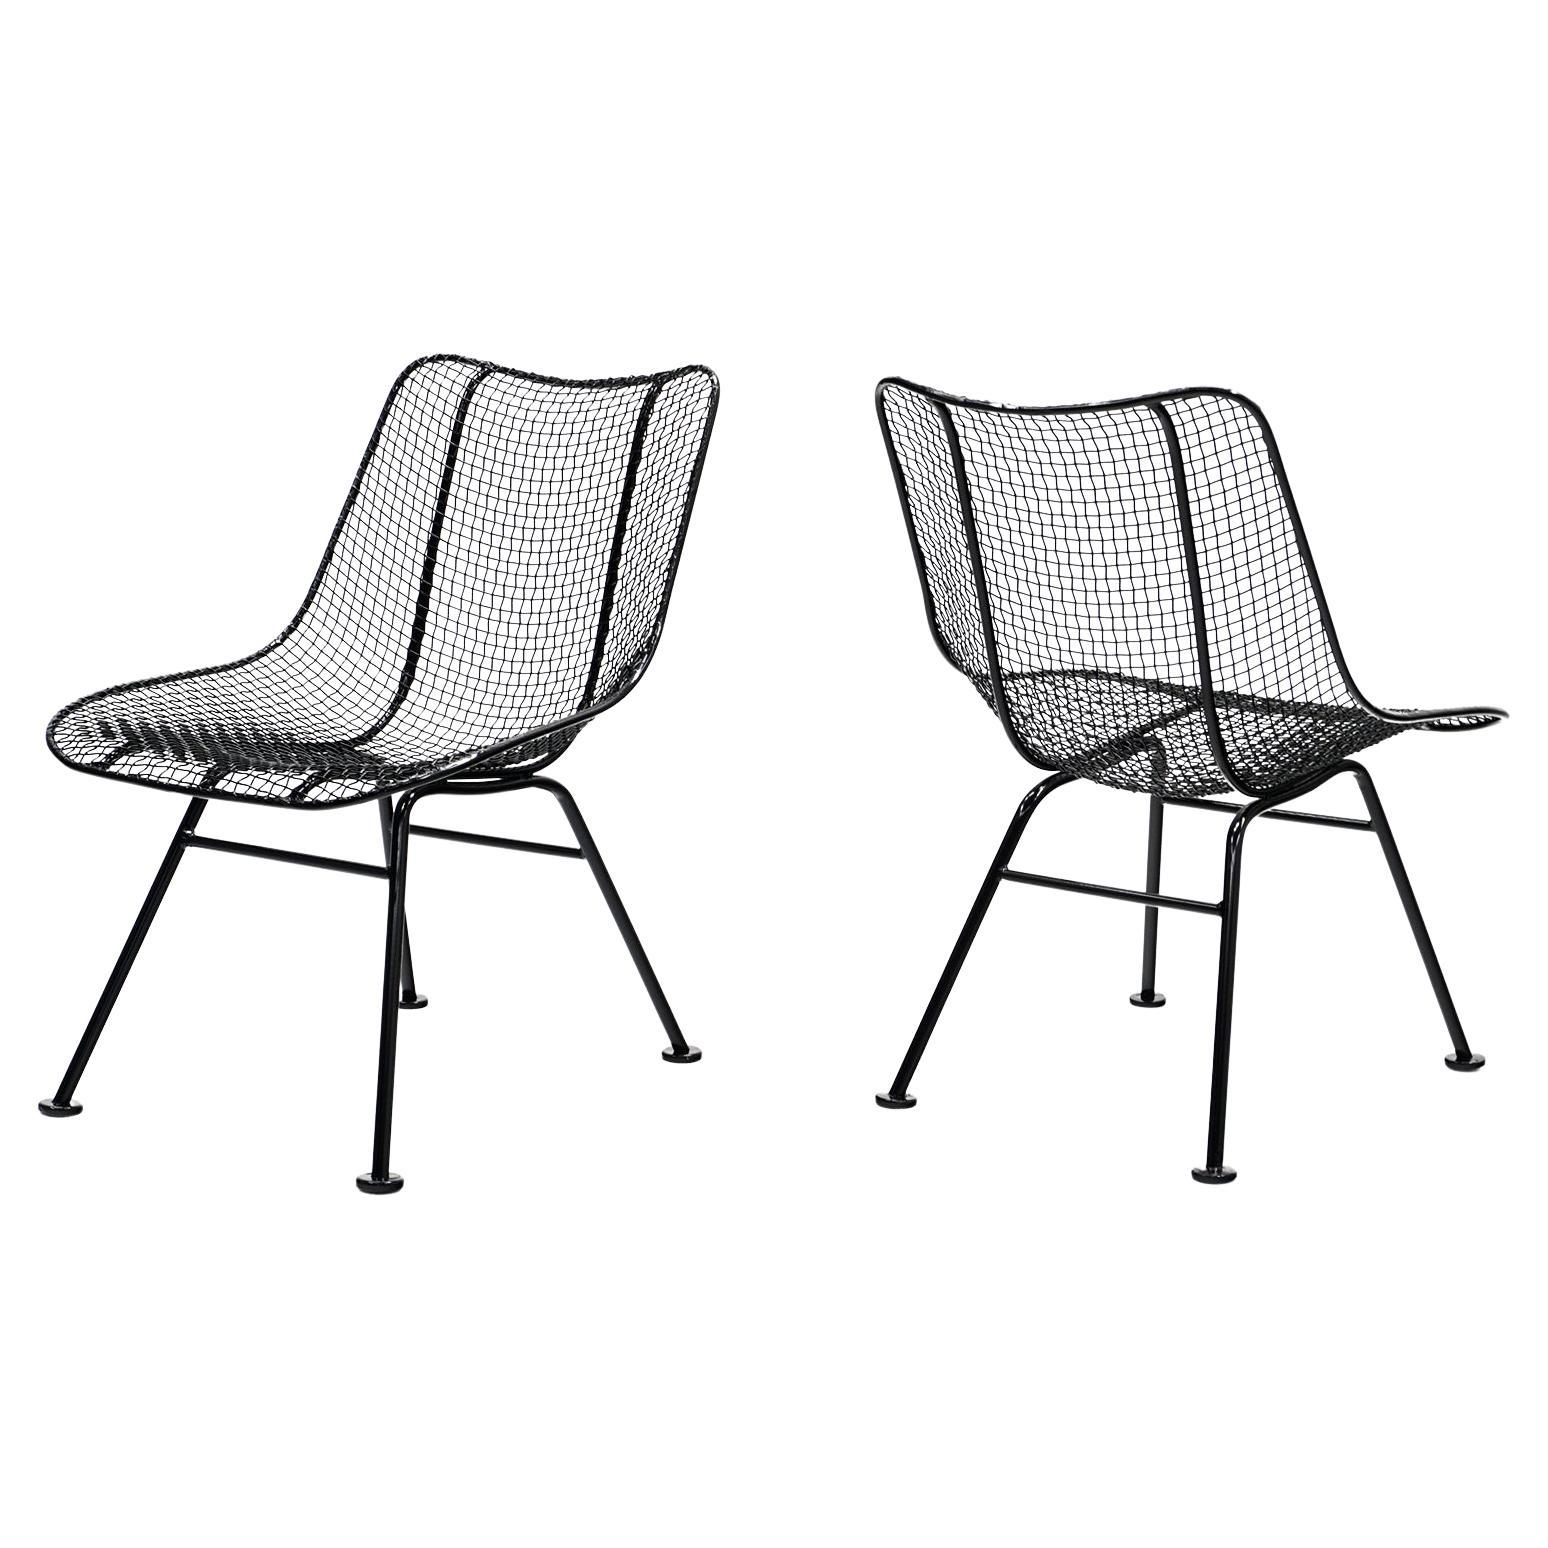 Pair Sculptura Side / Dining Chairs by Woodard. Expertly Restored in Satin Black